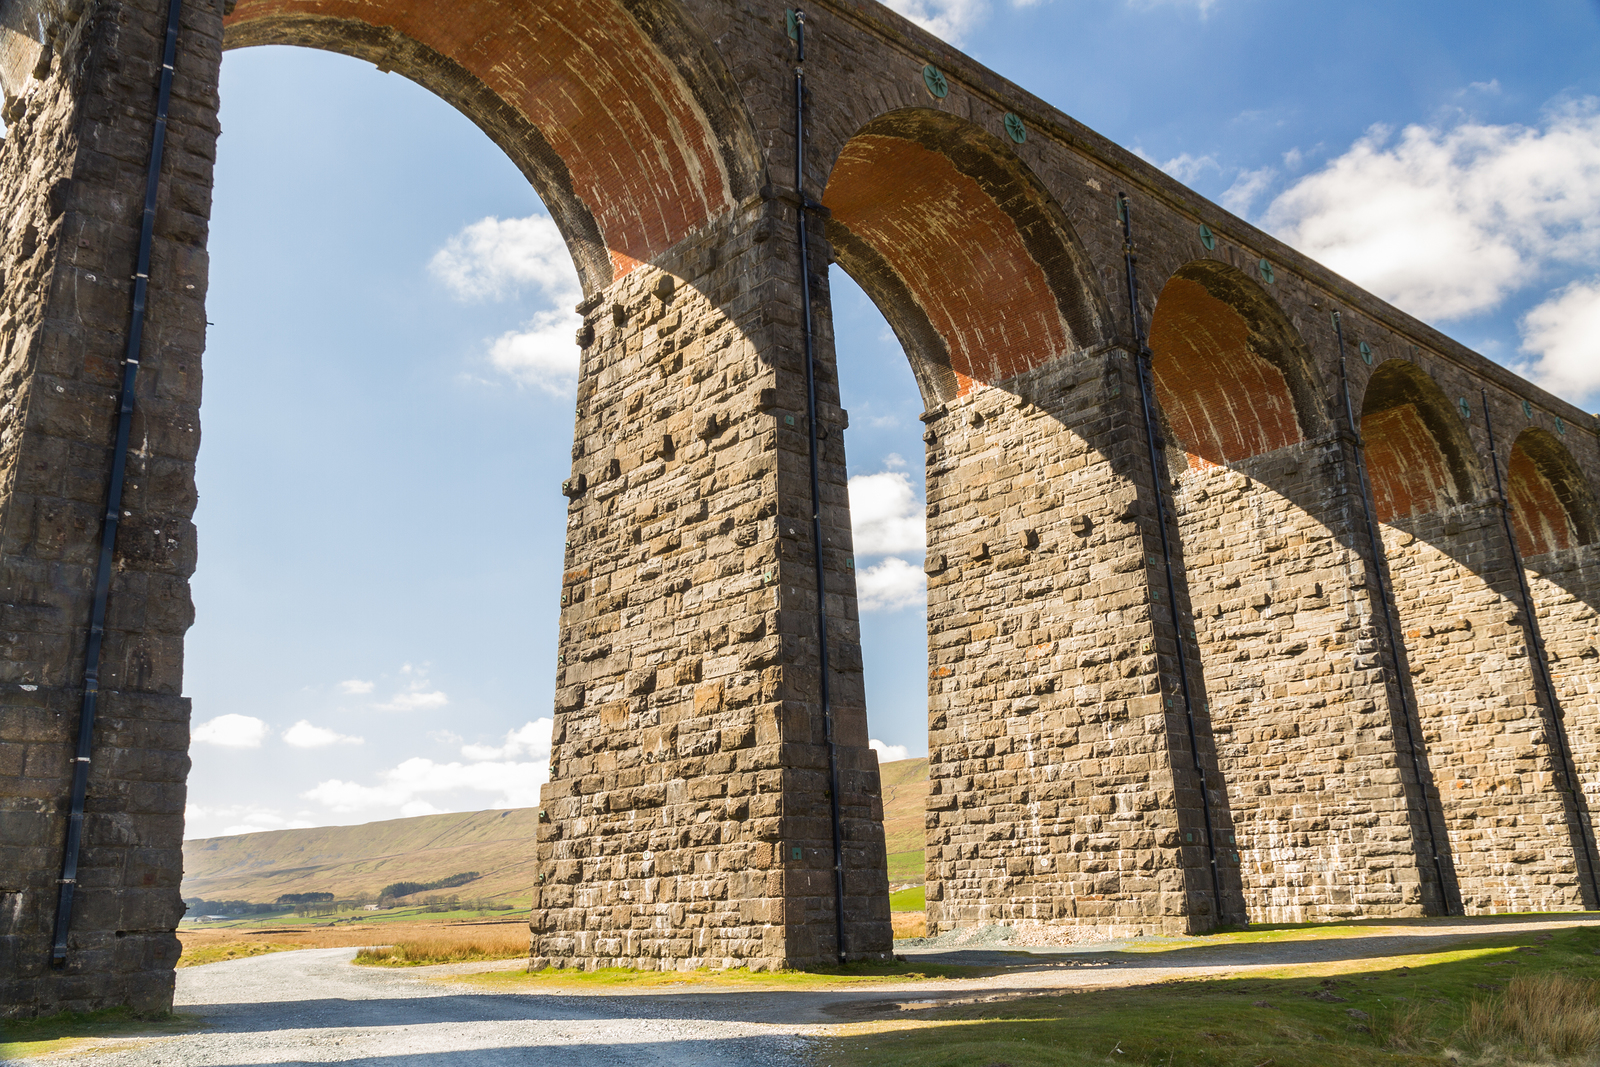 Towering Sunlit Arches Of A Railway Viaduct